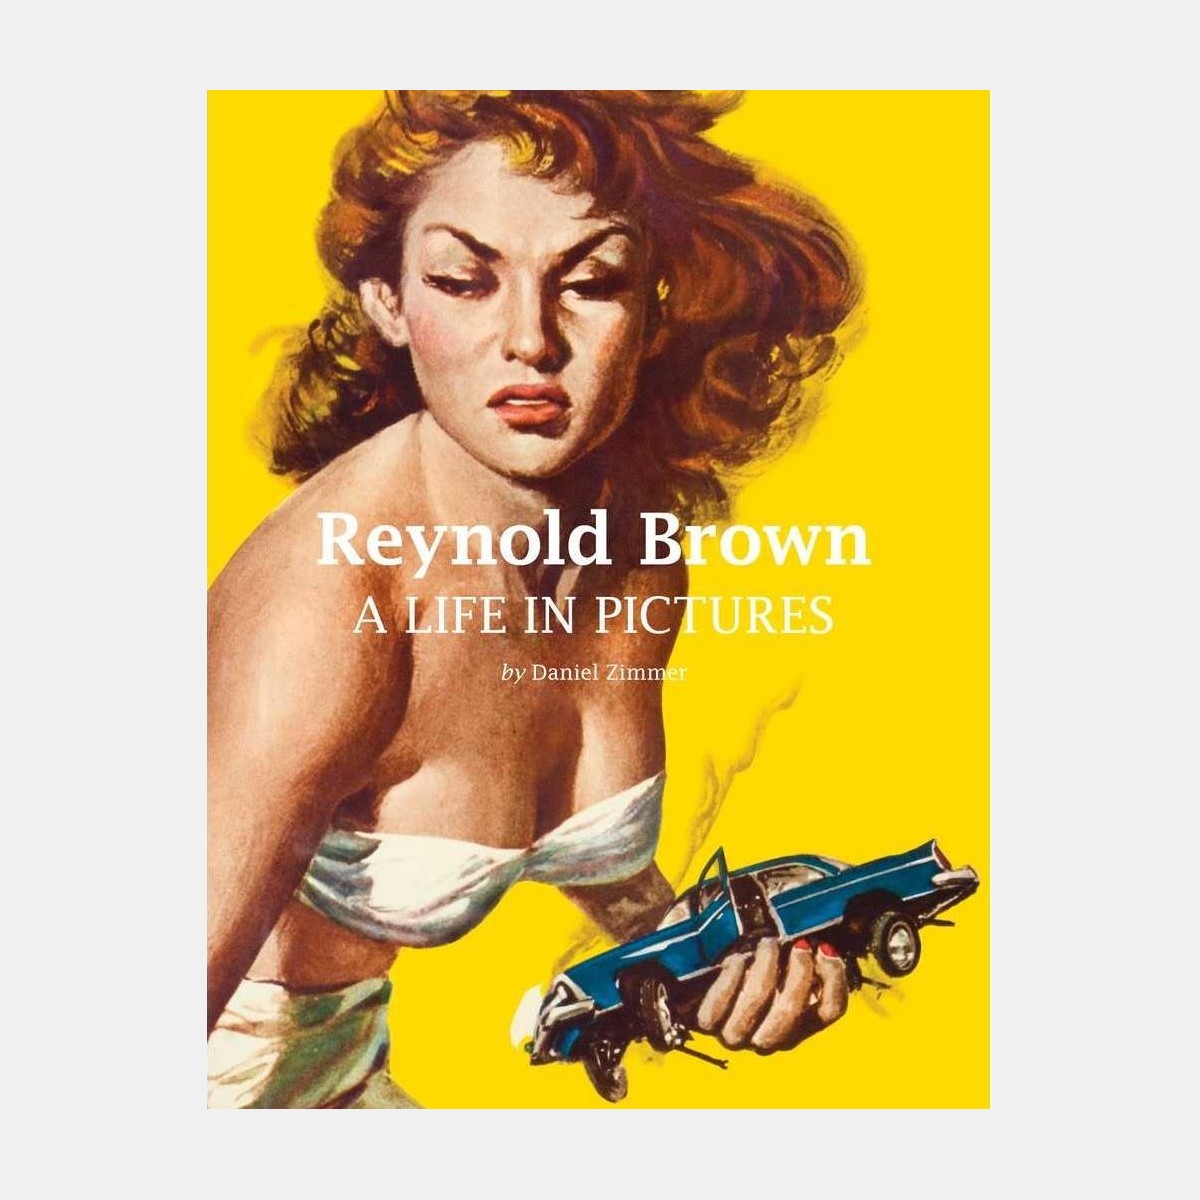 Reynold Brown : a life in pictures